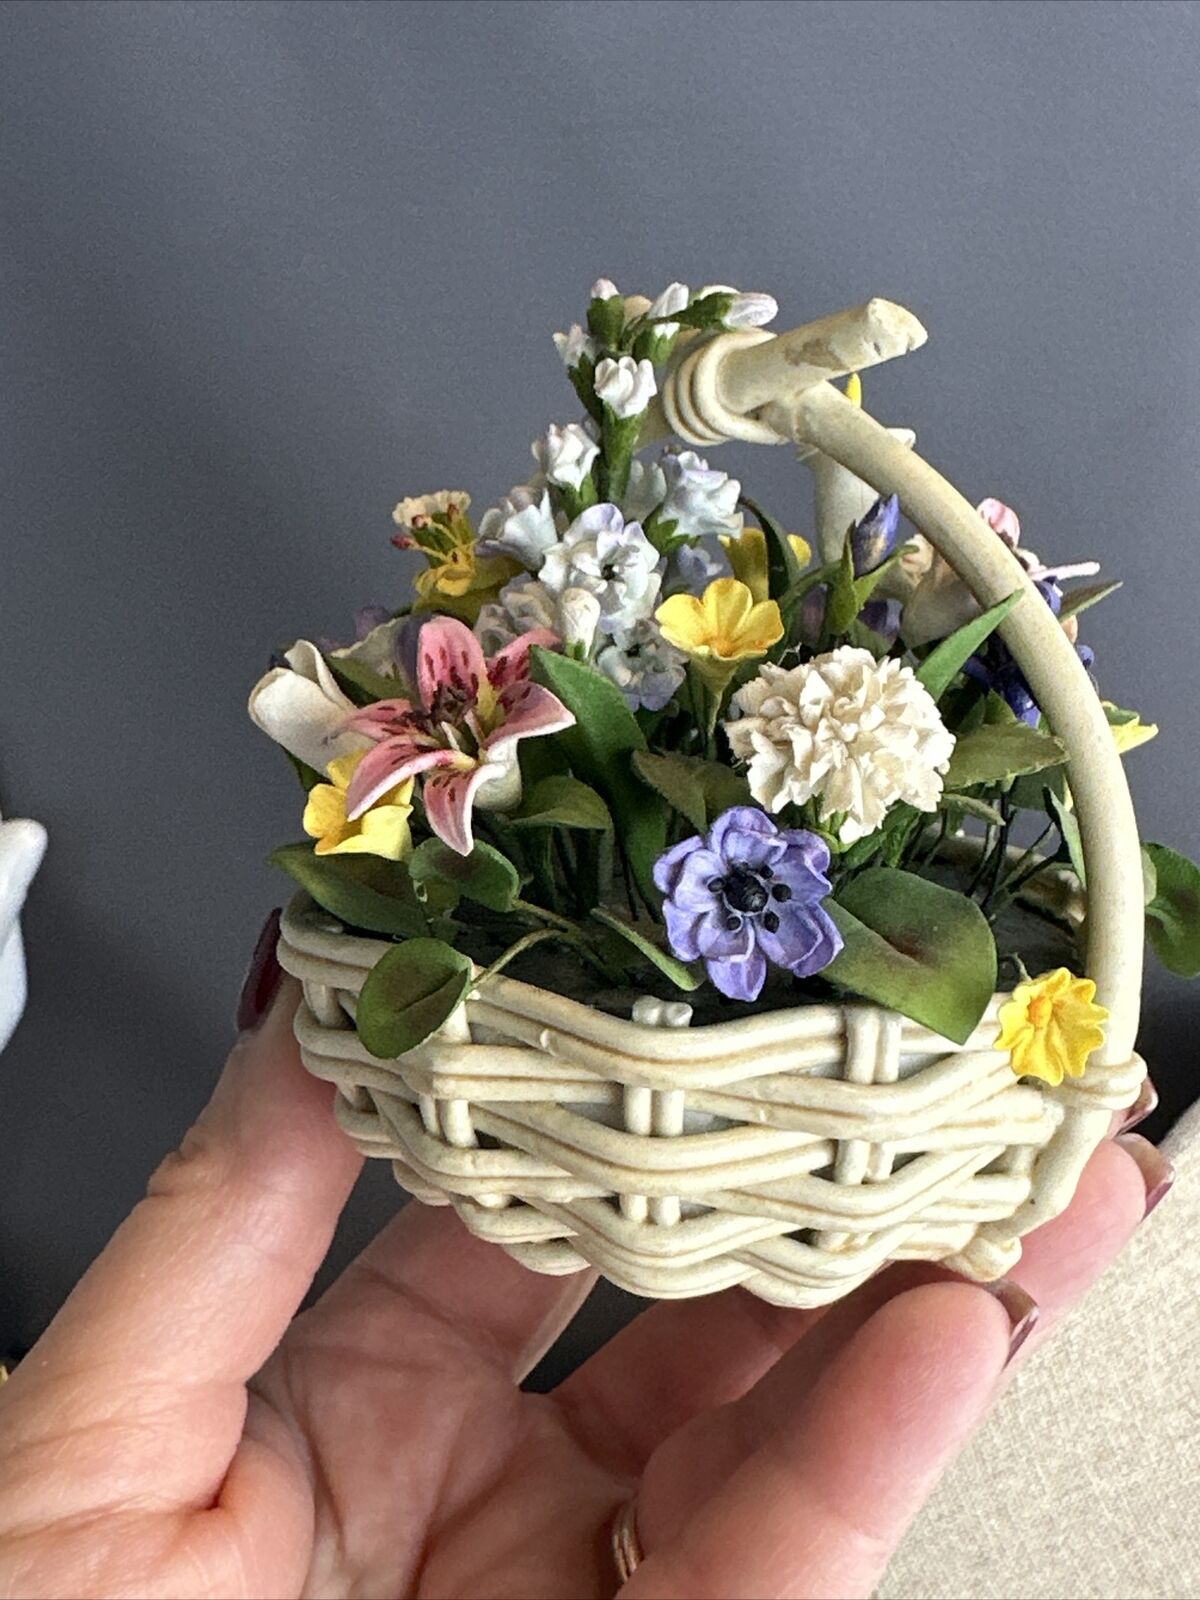 Vintage Ceramic Basket Hand Made With Paper Flowers